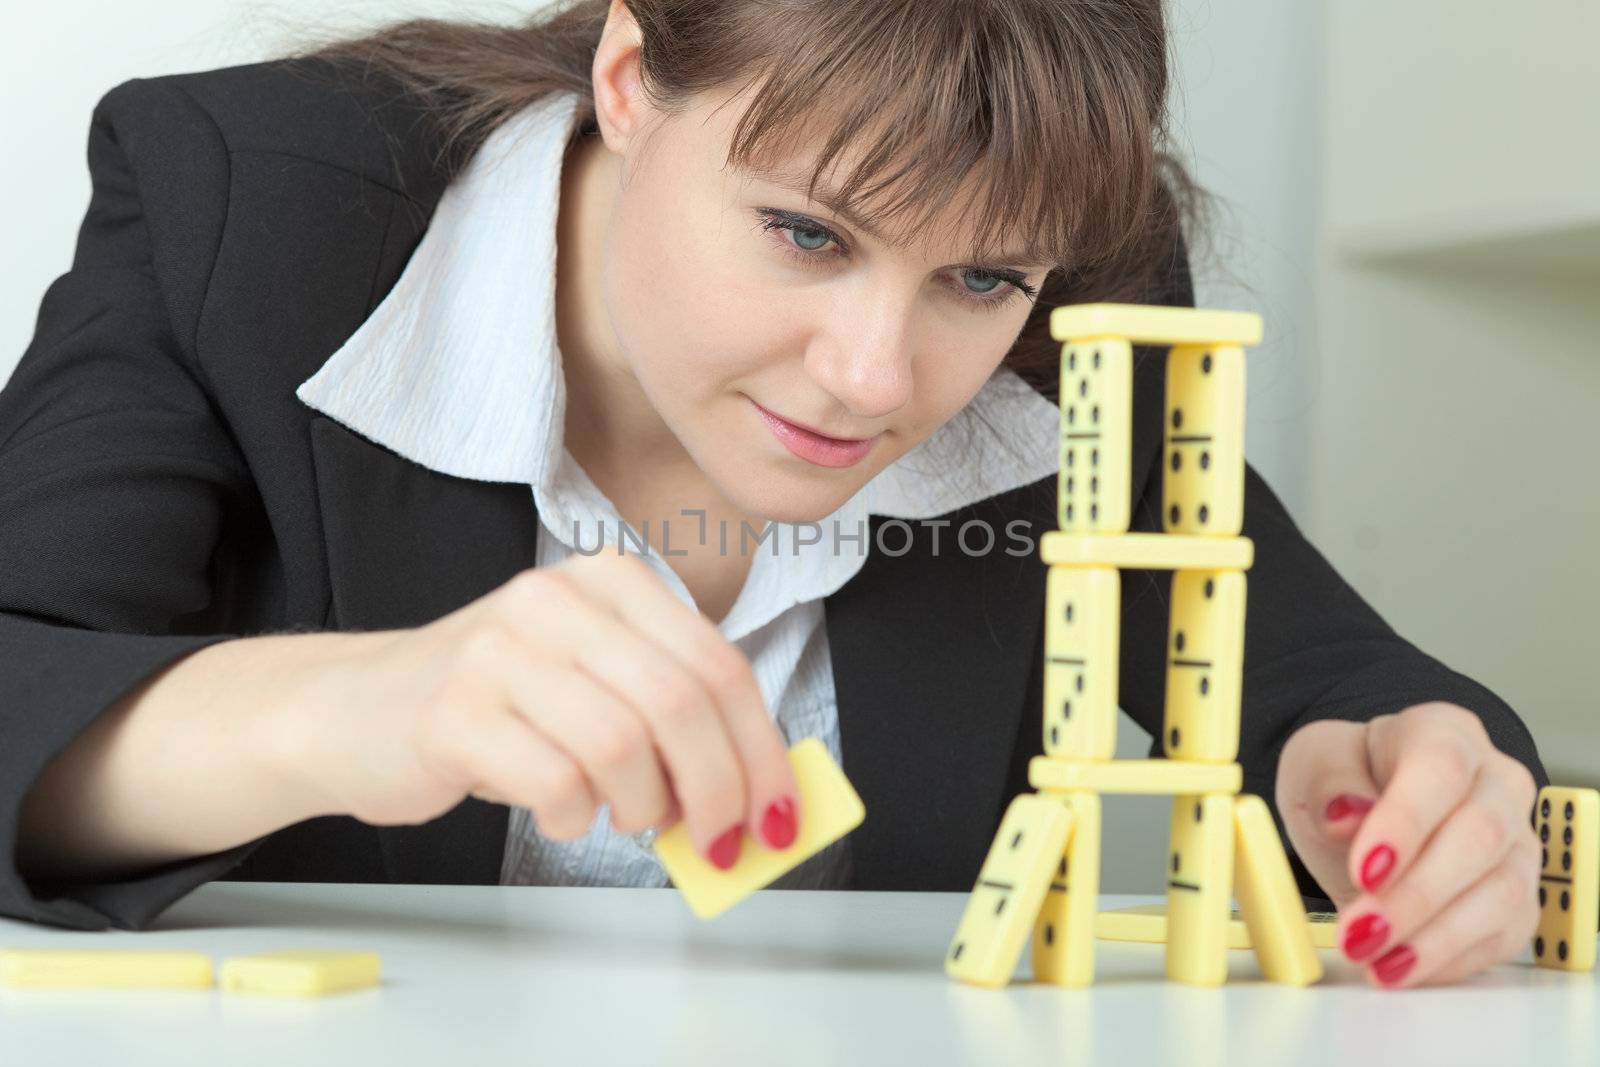 The young woman builds a tower of dominoes bones on a table